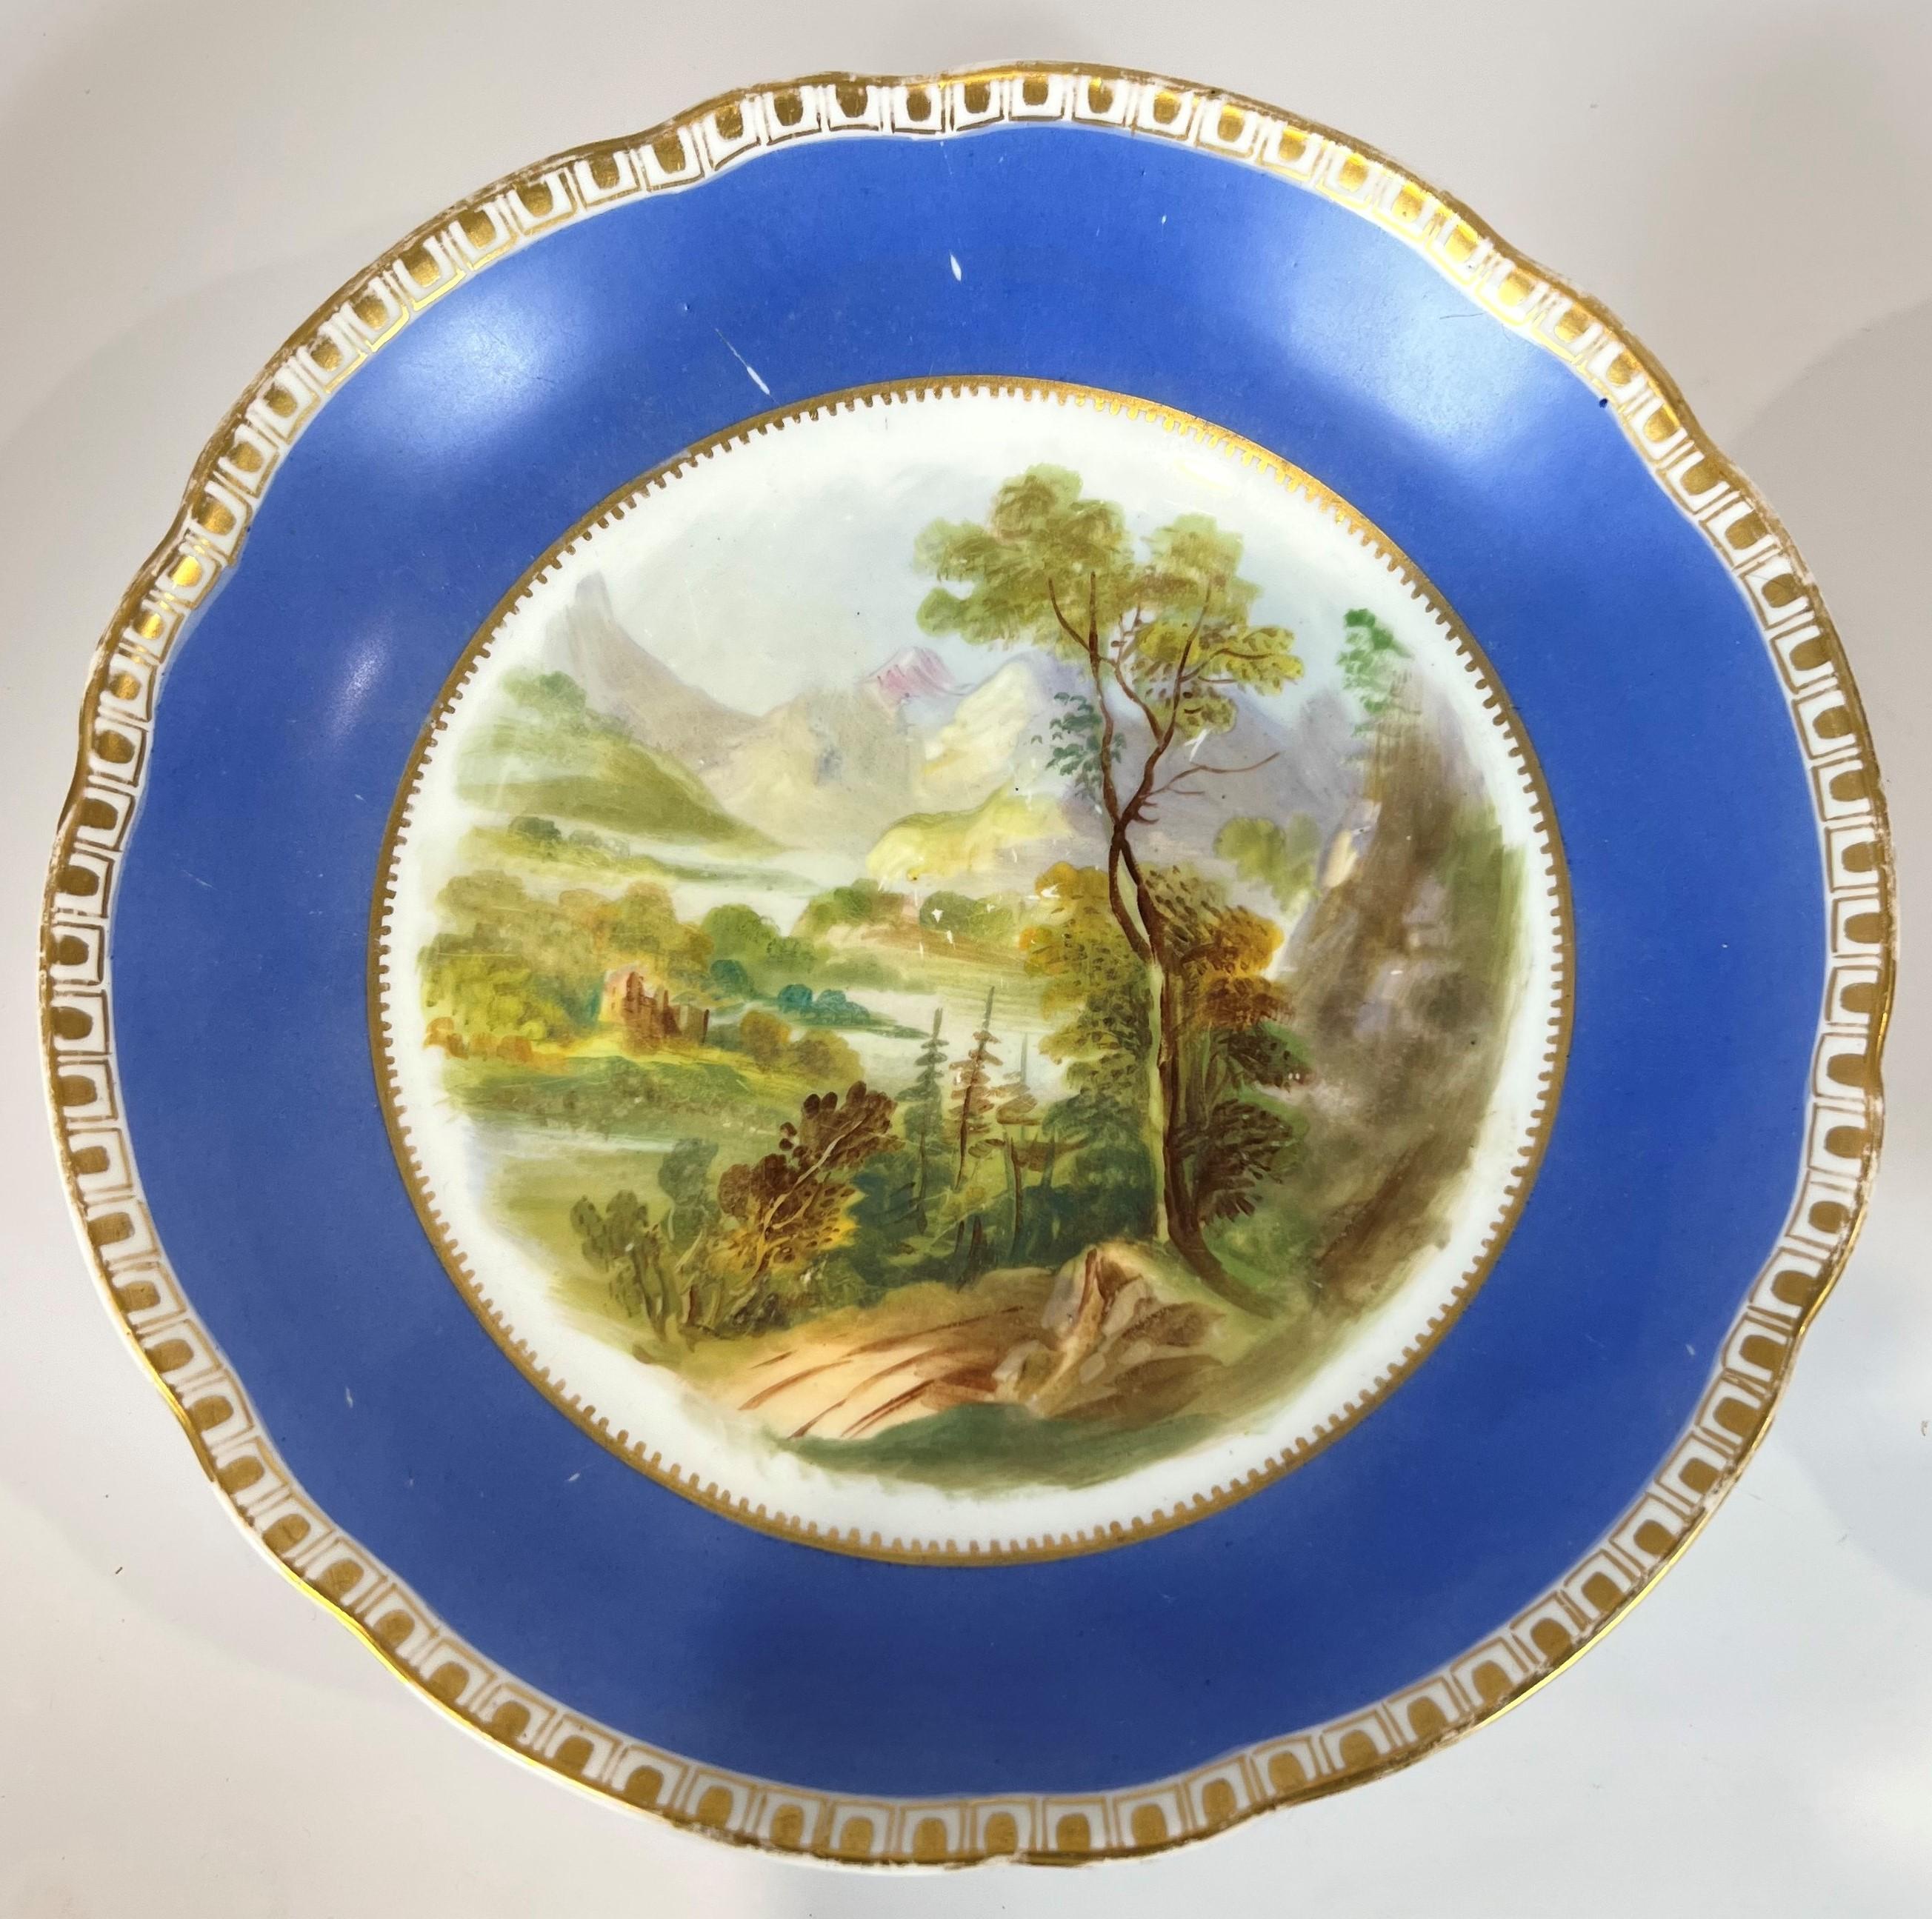 Fantastic Pair of cobalt gilt edge compotes with scenes of Scotland.  Entire sets of dishes with Scottish landmarks were produced, especially for the American Market in the 1870's, but they are not altogether easy to find, particularly if your